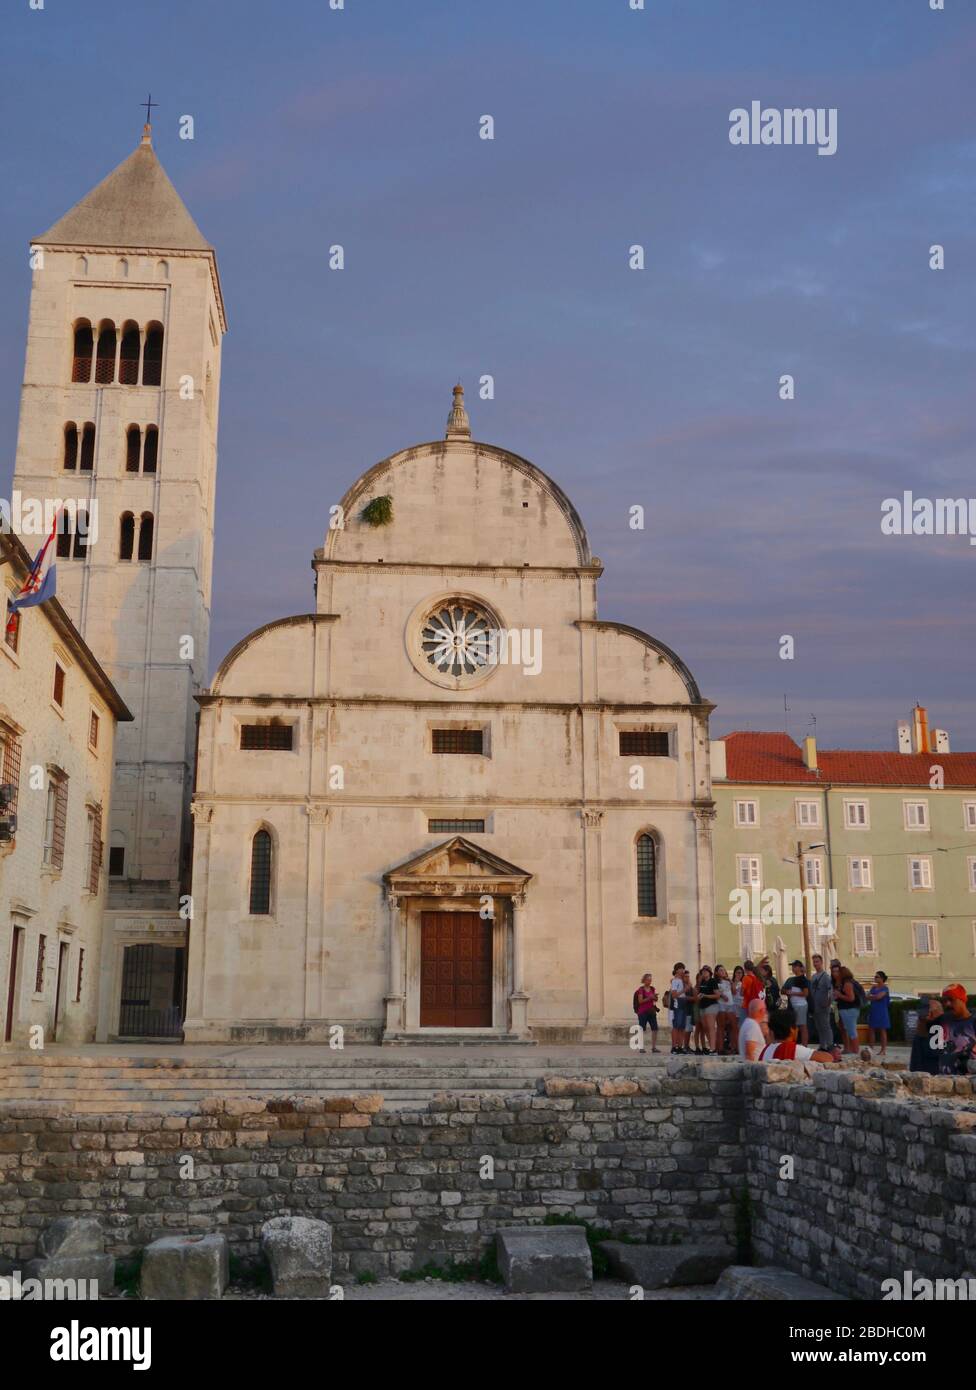 Guided Tour Group outside of St. Mary Church located in old city of Zadar, Croatia Stock Photo